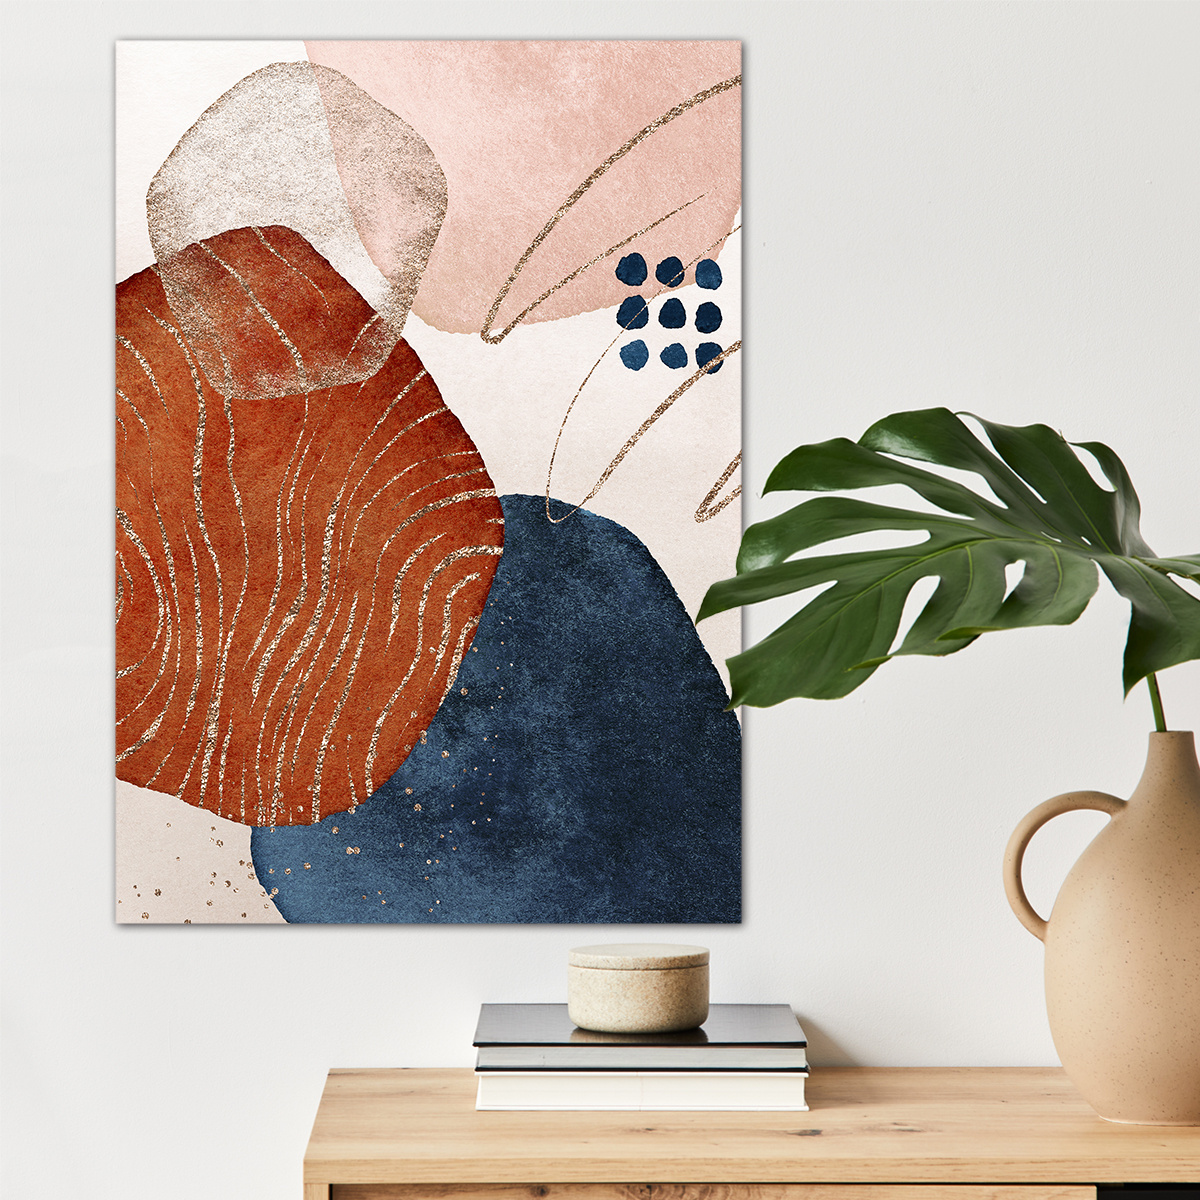 

1pc Canvas Wall Art For Home Decor, Boho Style Abstract Modern Poster, Canvas Prints For Living Room Bedroom Kitchen Office Cafe Decor, Perfect Gift And Decoration, No Frame